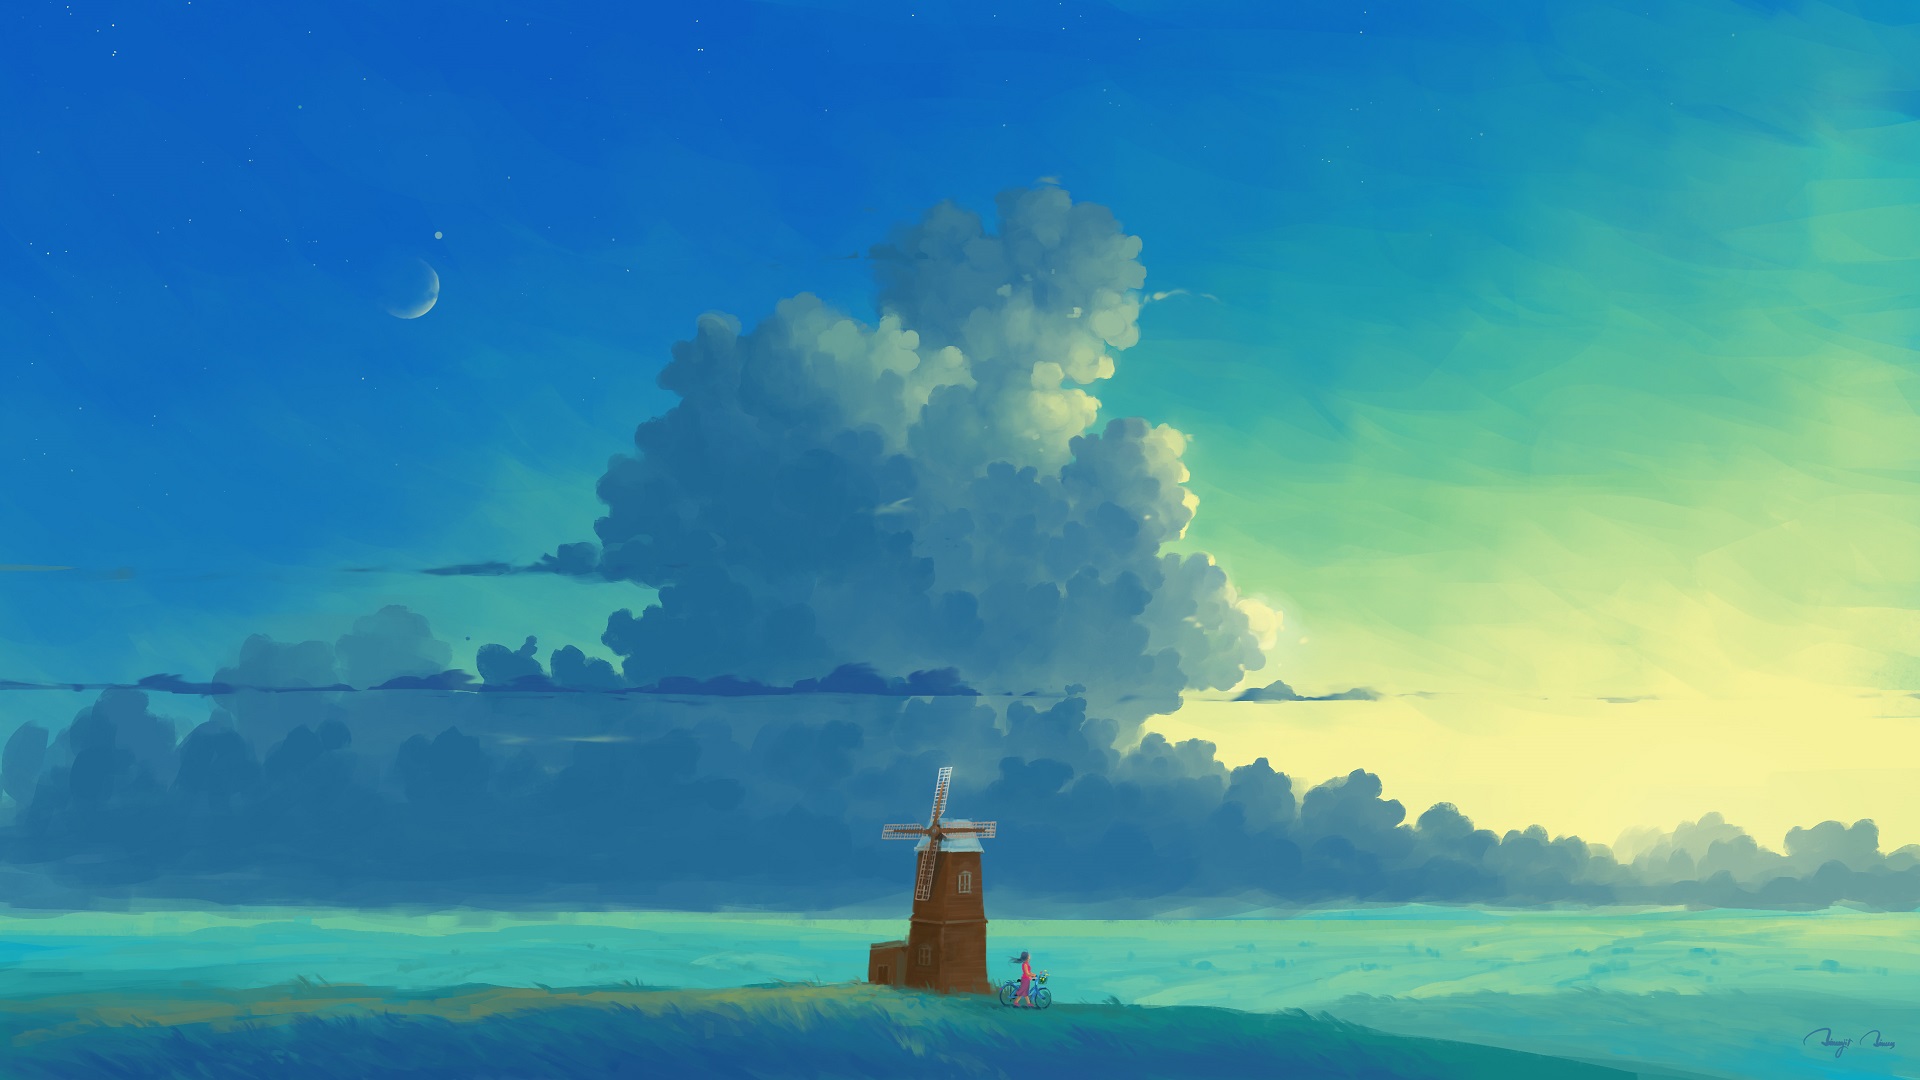 General 1920x1080 digital painting sky clouds landscape windmill crescent moon blue